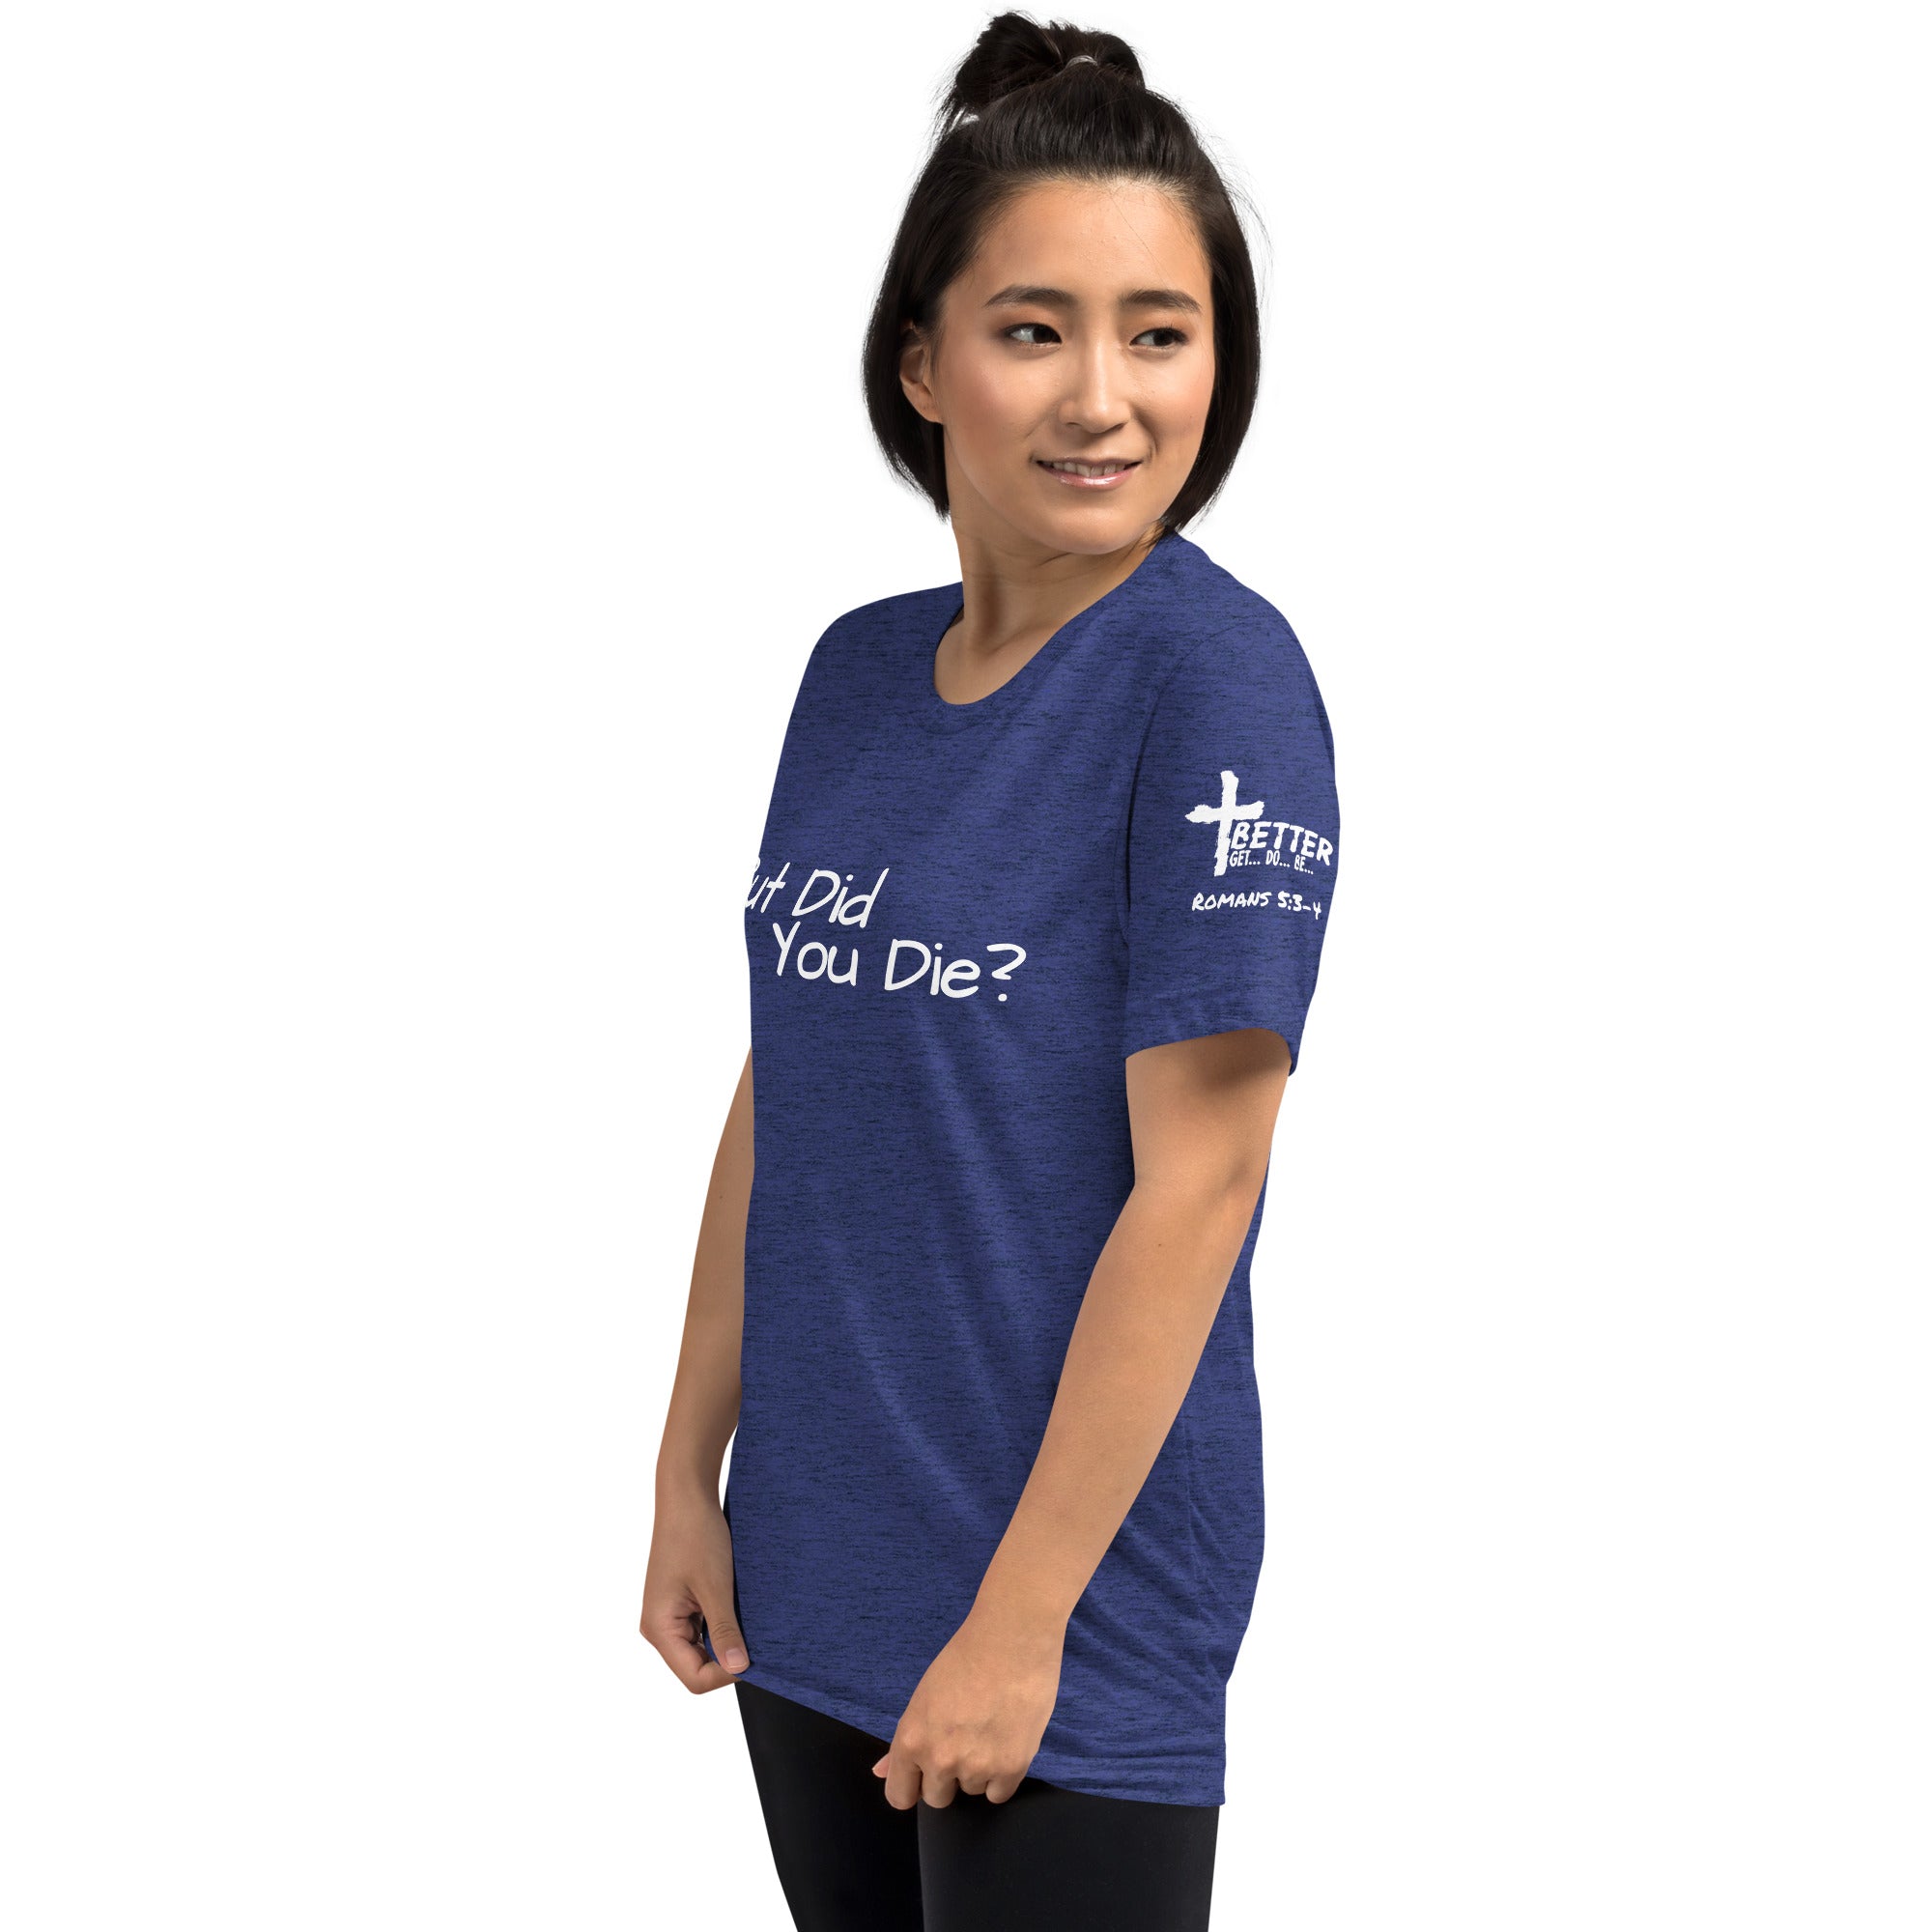 But Did You Die? Inspired T-shirt | Romans 5:3-4 Short sleeve t-shirt | Get, Do, Be Better